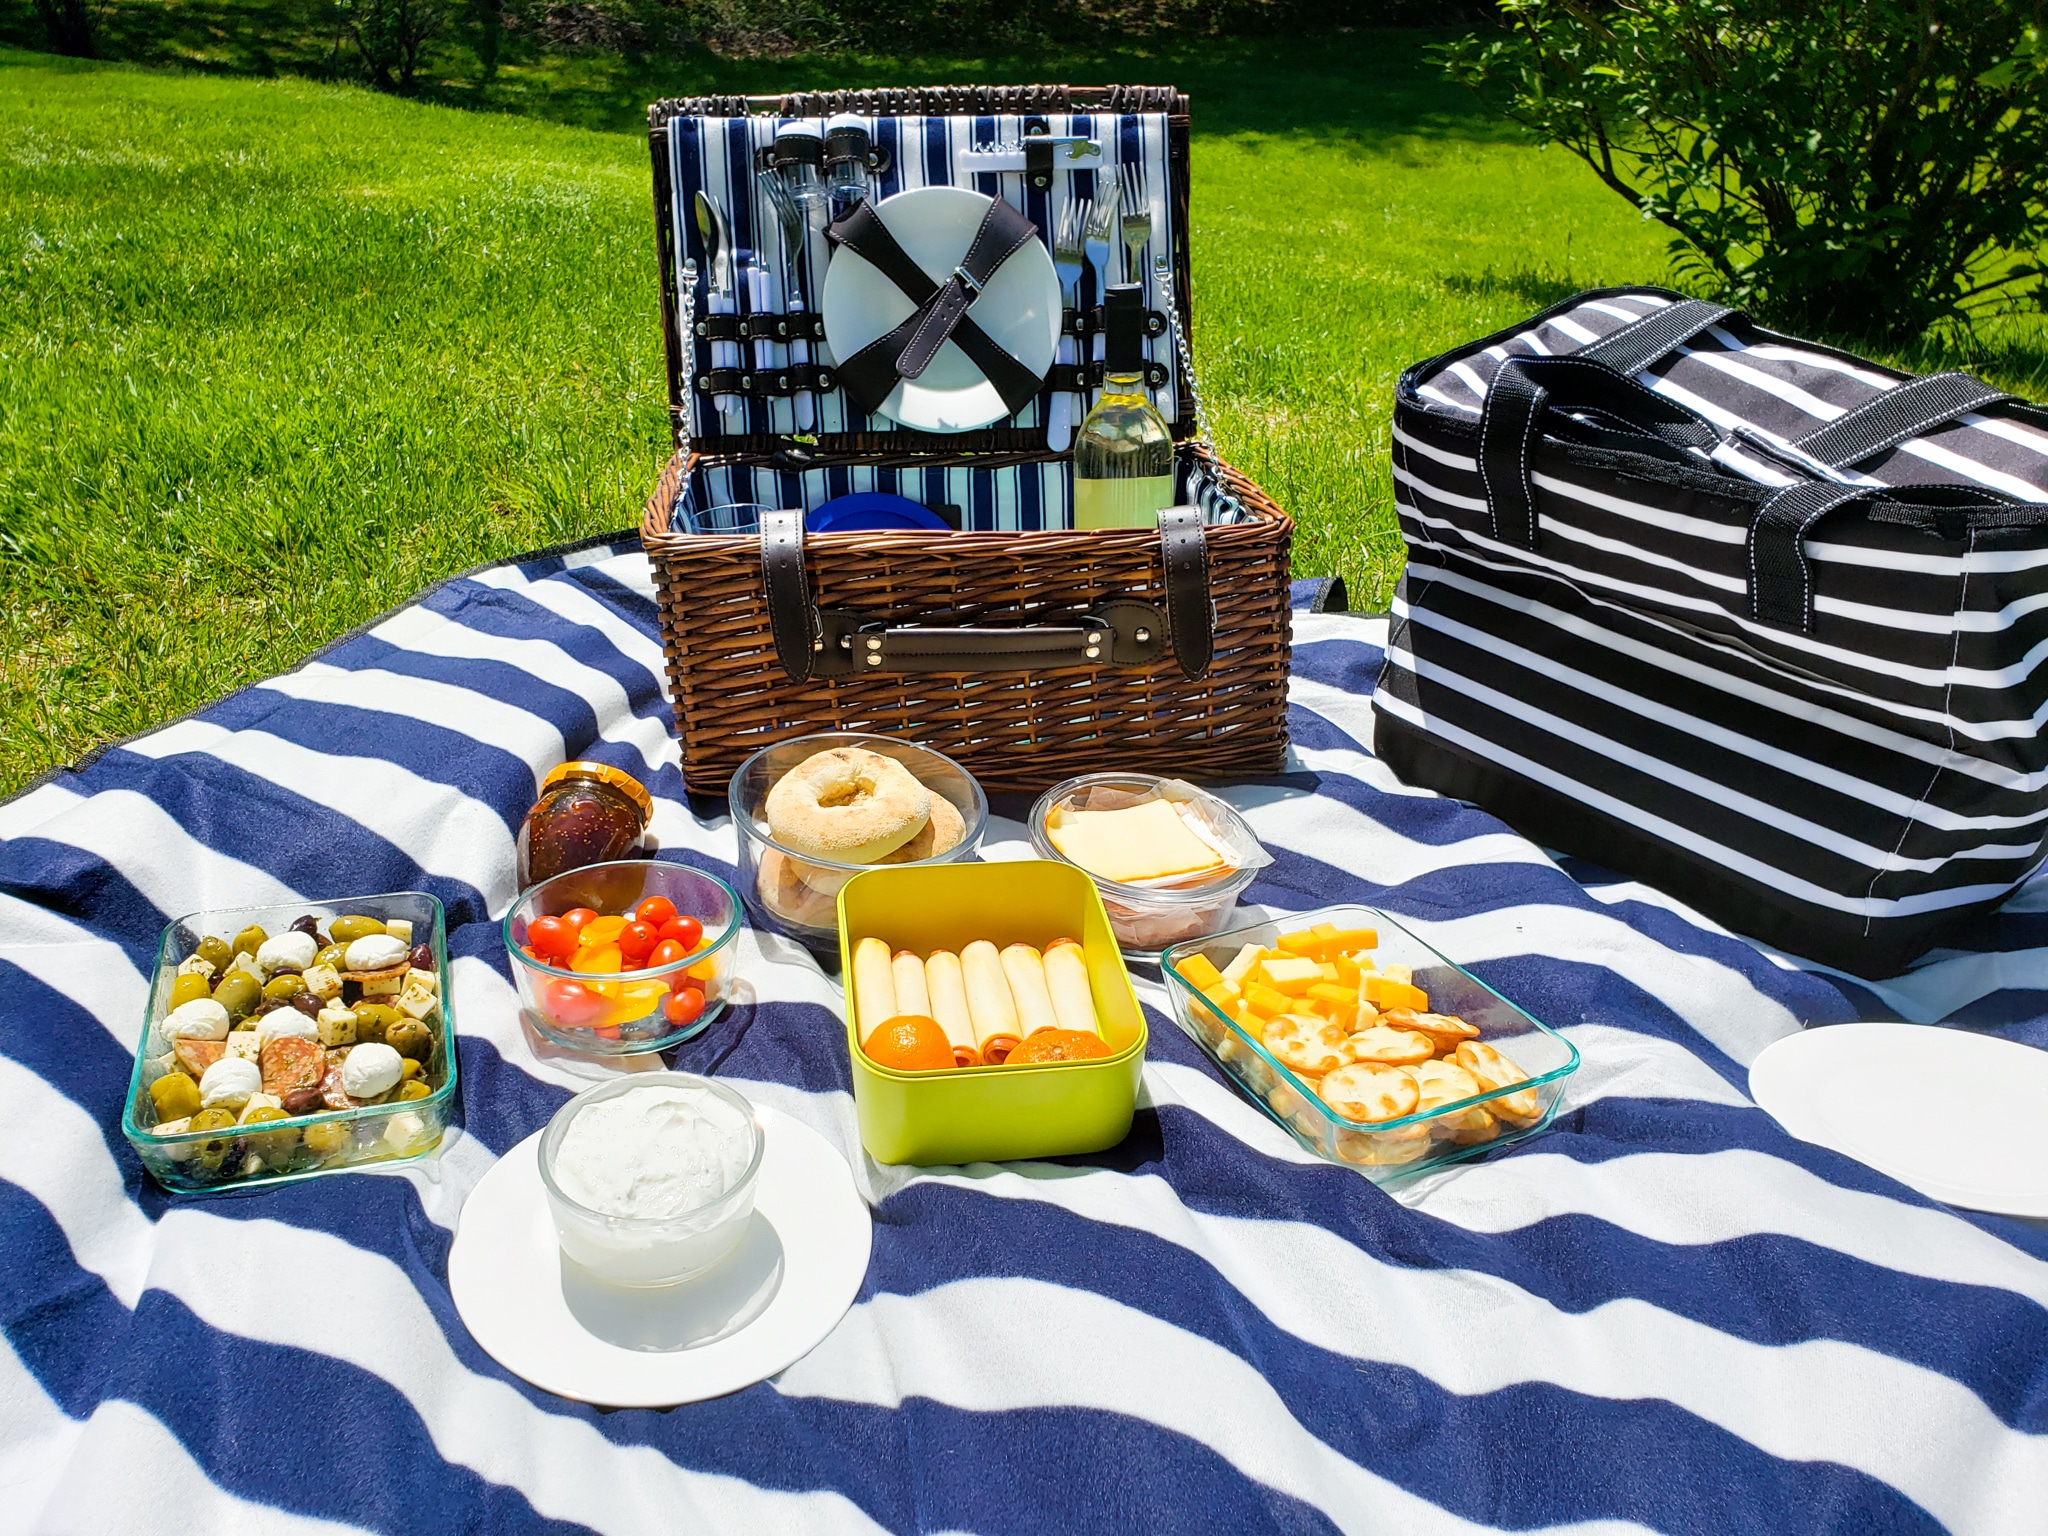 another view of the picnic spread